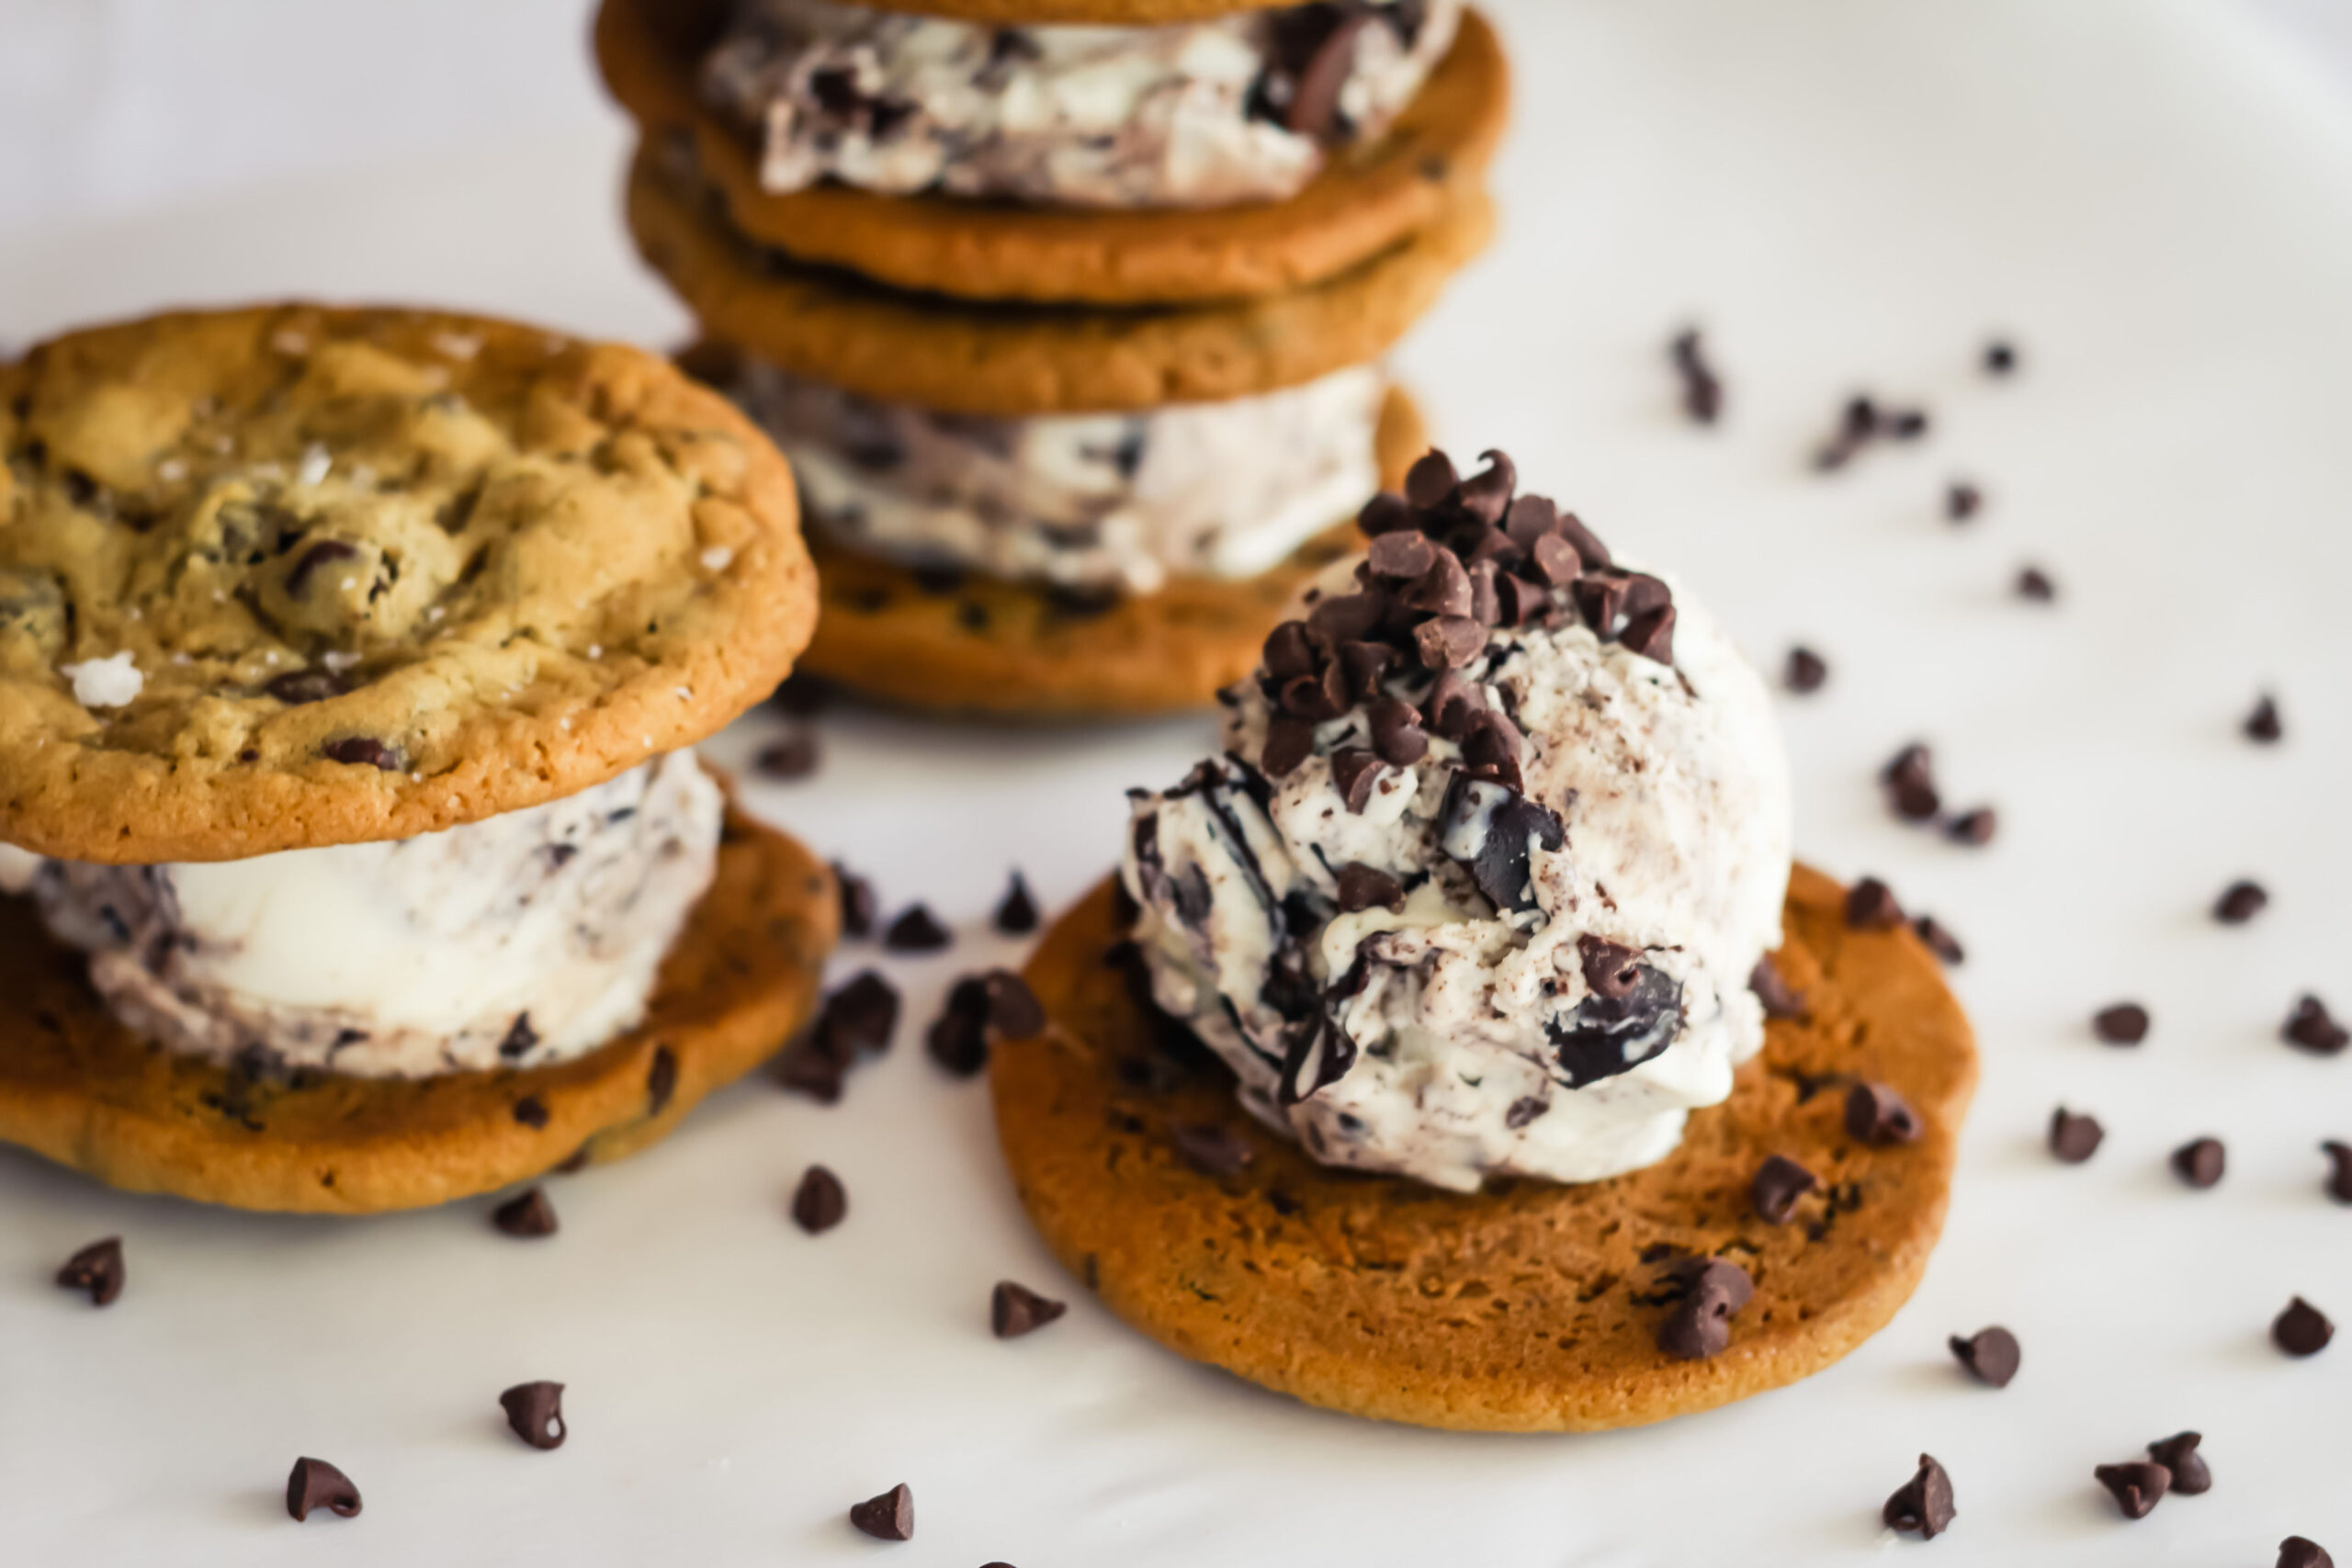 Cookies and ice cream sandwiches on a table.